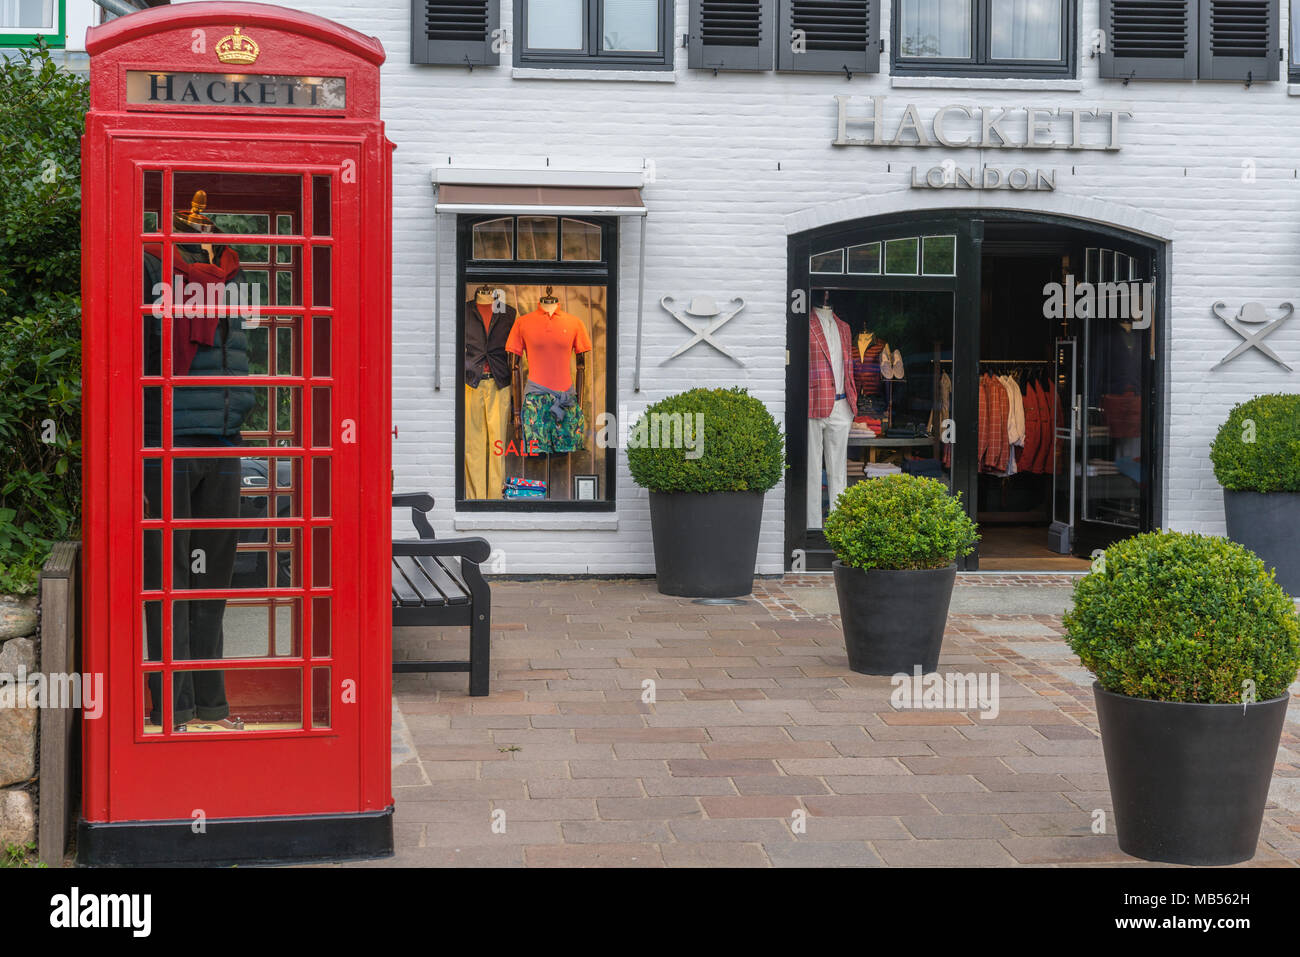 Fashion Shop London High Resolution Stock Photography and Images - Alamy